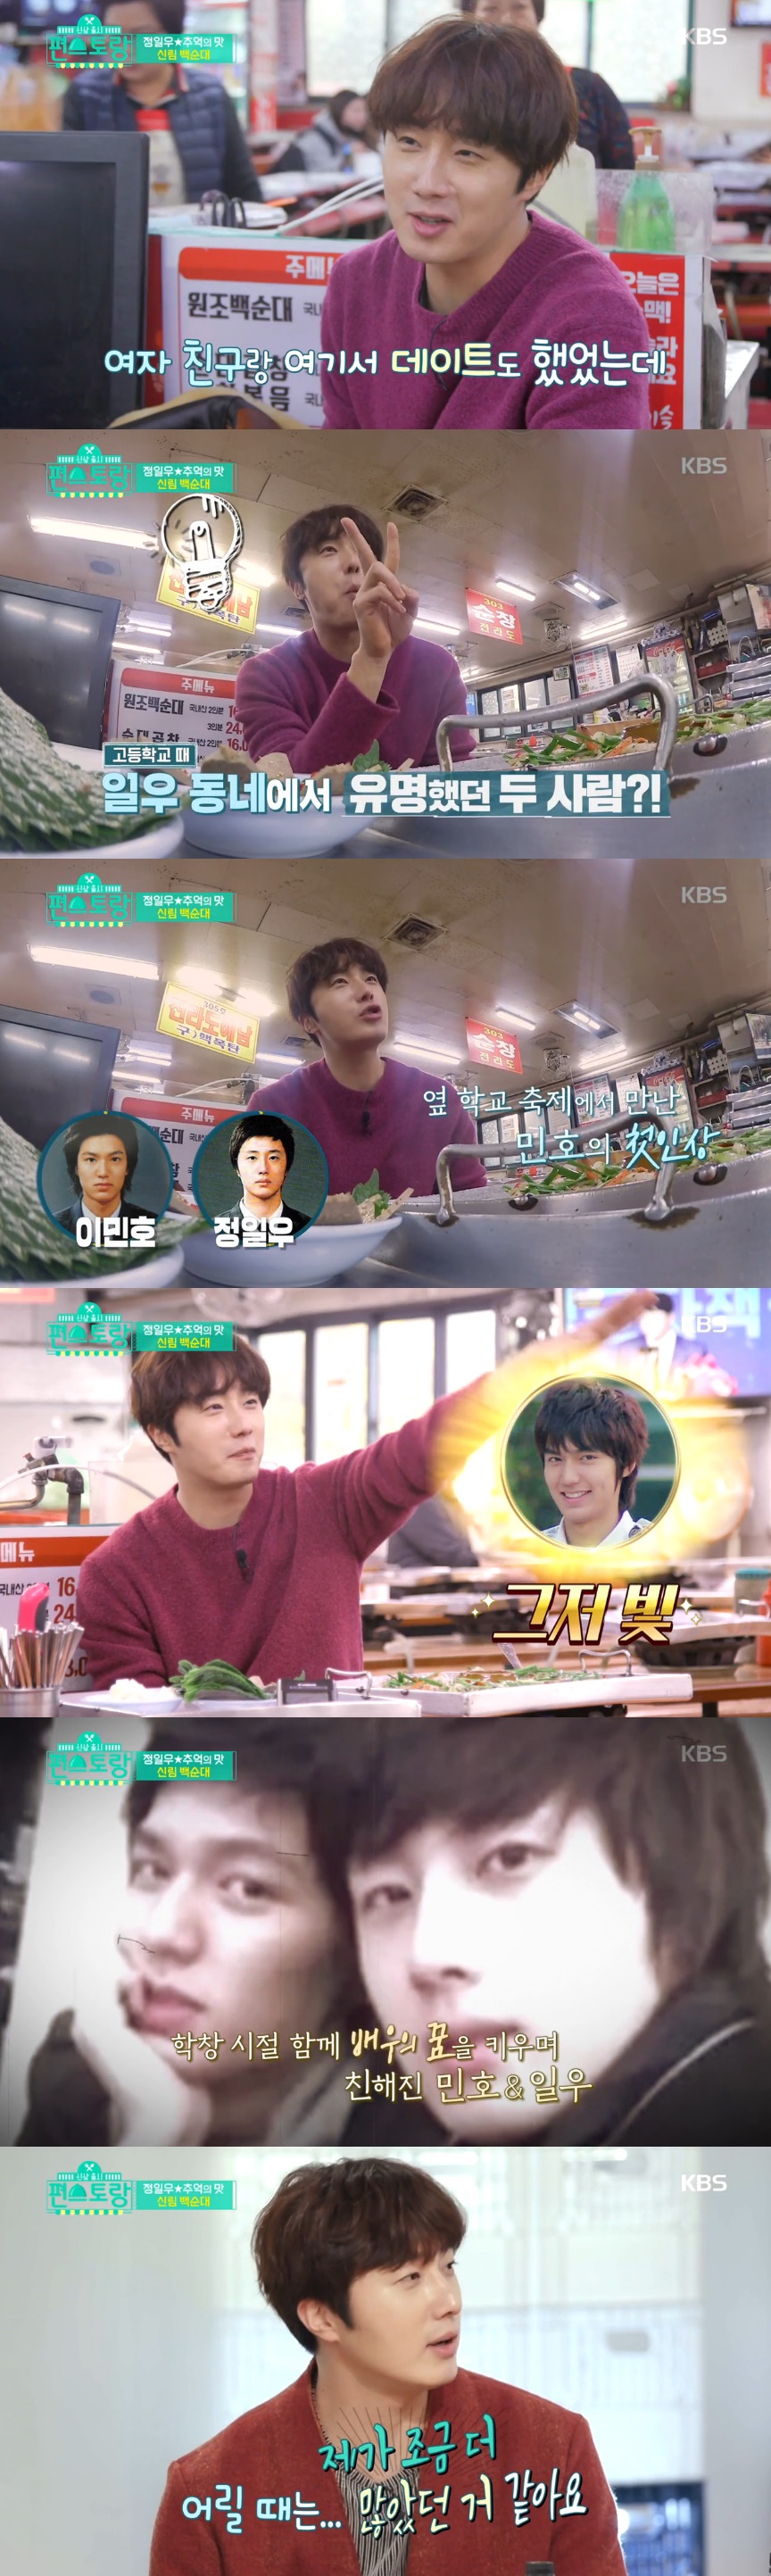 Jung Il-woo mentioned his thick friendship with Lee Min-ho in Folk Sundae Town.Actor Jung Il-woo at KBS 2TV New Story broadcast on January 17 revealed his memories of school days at Sillim-dong Folk Sundae Town.Jung Il-woo headed to the Sillim-dong Folk Sundae Town to eat memorable food.When I was a high school student, I dated my girlfriend here and that was it, Jung Il-woo recalled.Jung Il-woo said: There were two of the most famous people in our neighborhood: Lee Min-ho and Jung Il-woo.When I was a kid, I went to Lee Min-ho school because there was a festival, and there was a shiny kid walking around from a distance. Lee Min-ho was really handsome when I was a kid.Lee Min-ho has been very close to Actor since he was a child, and I think he is really the only close friend. han jung-won